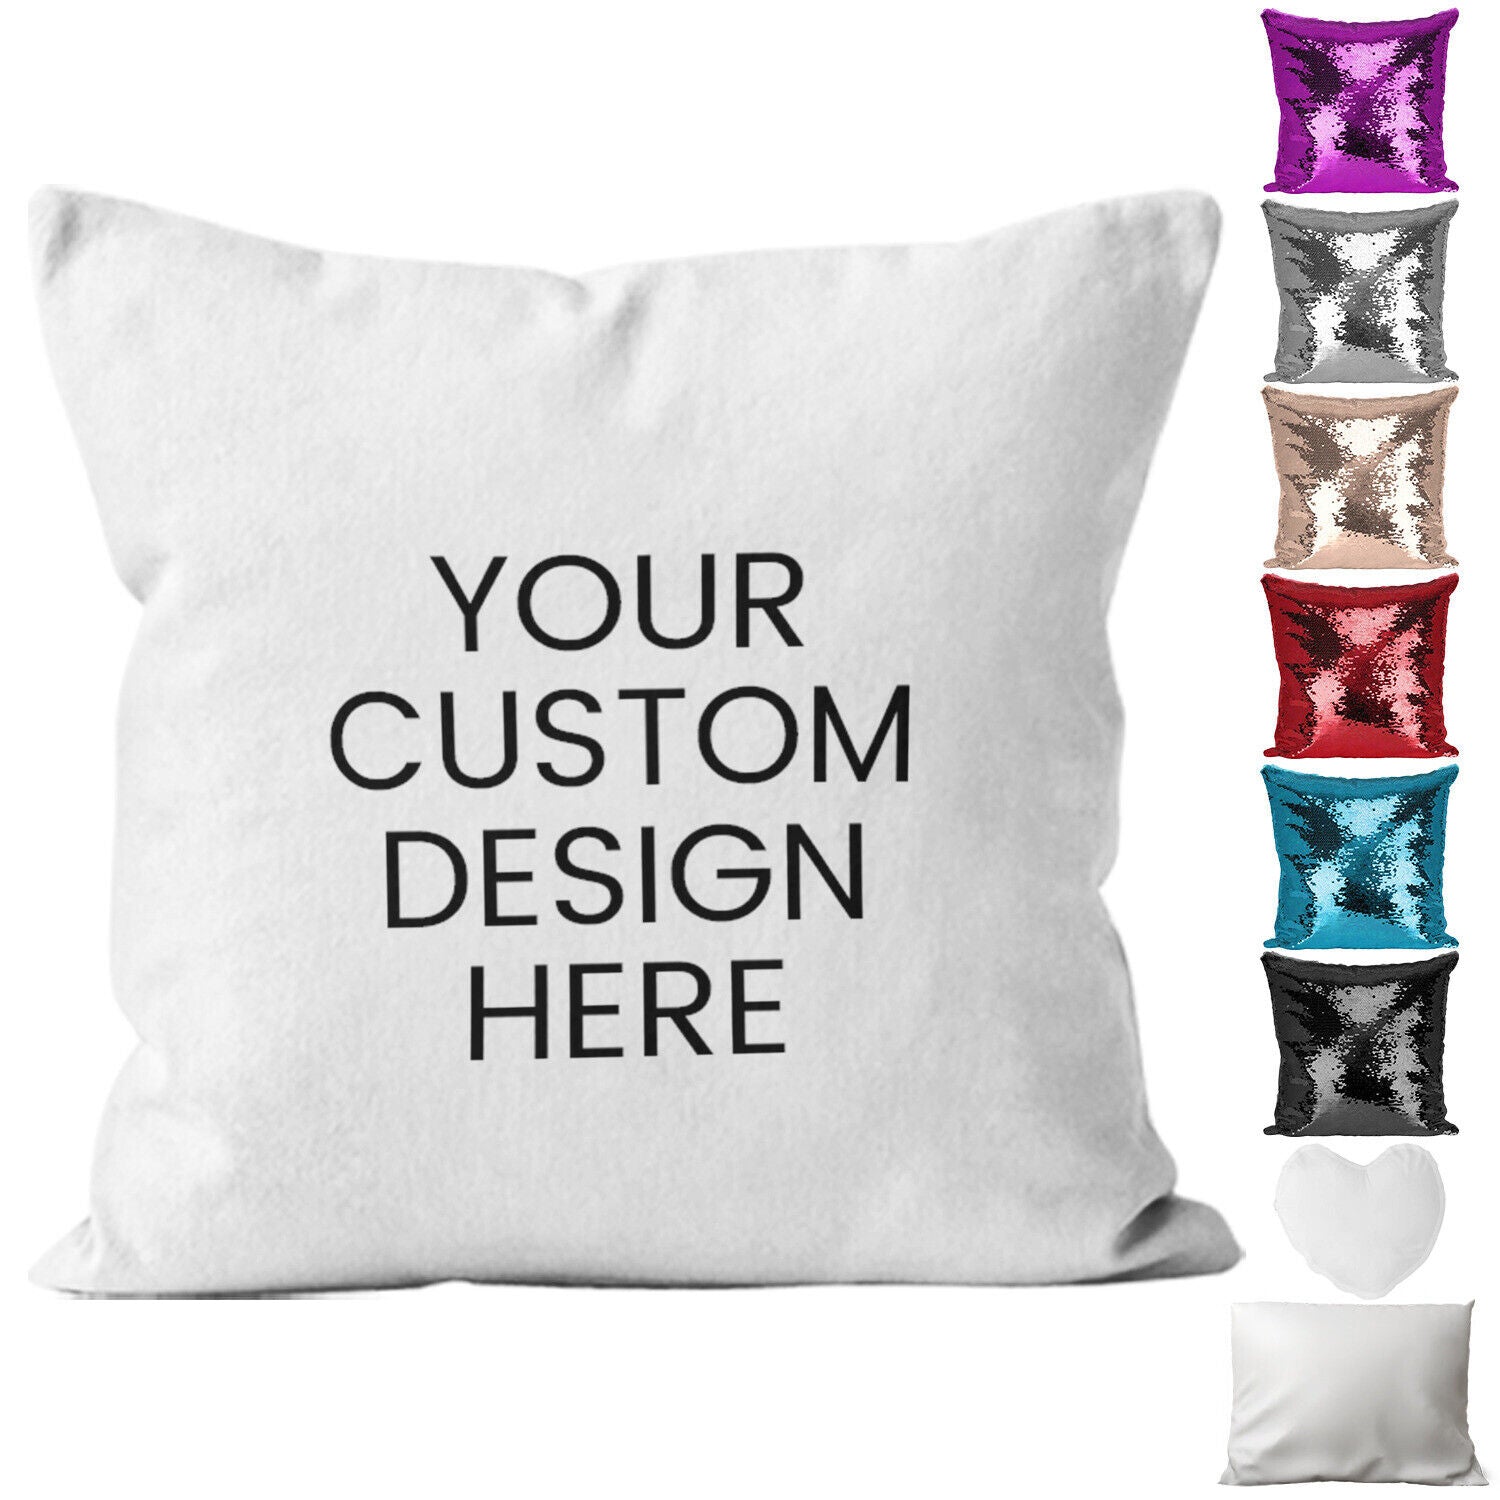 Personalised Cushion Animal Sequin Cushion Pillow Printed Birthday Gift 110